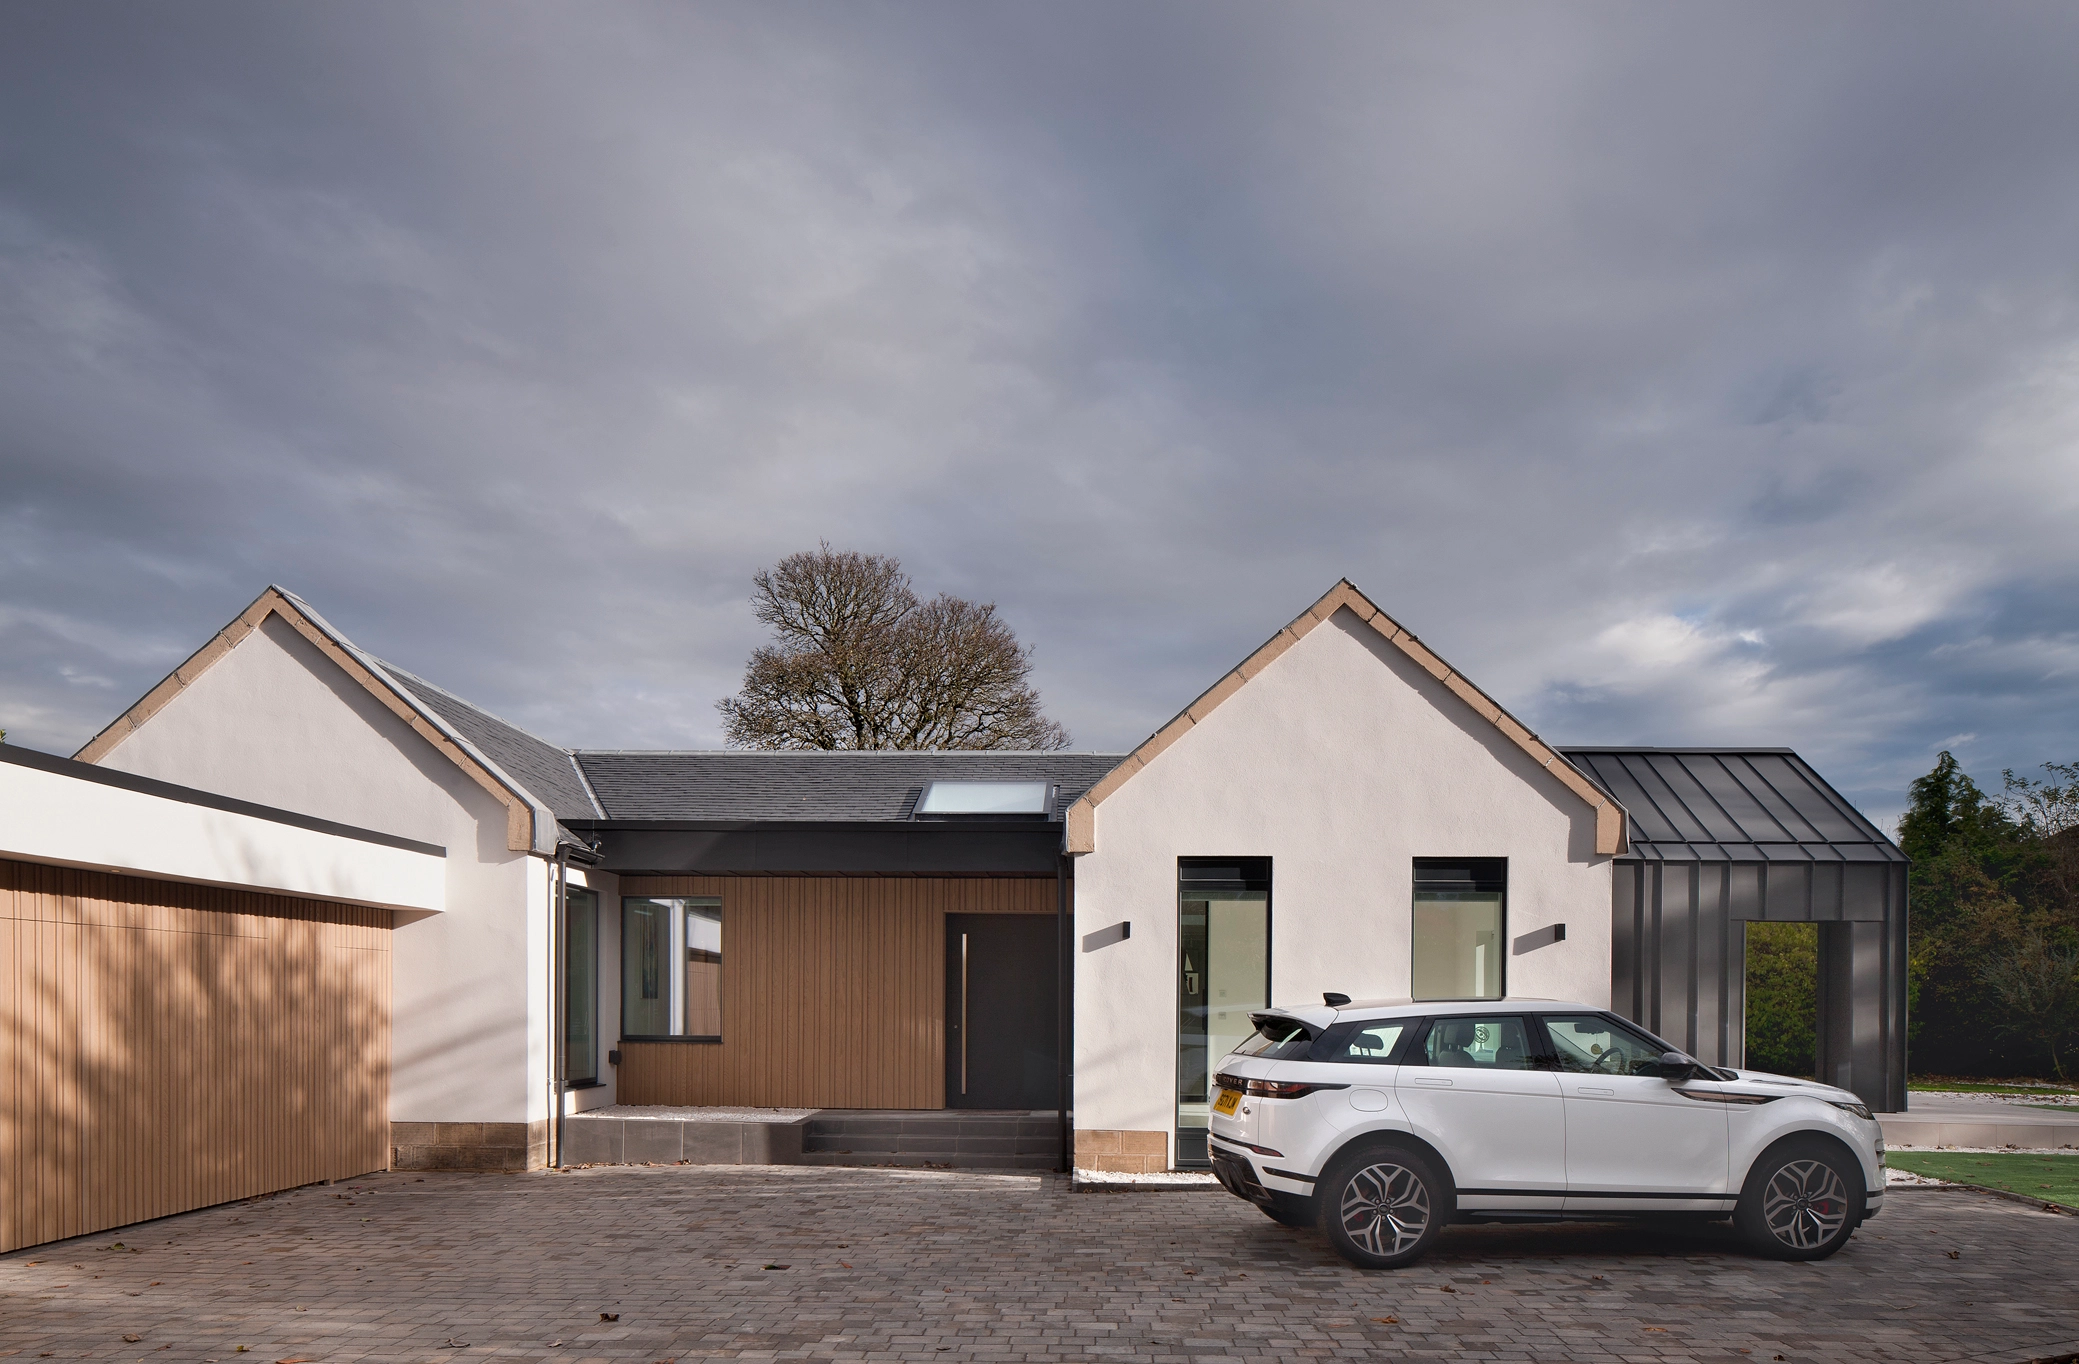 A modern retrofit renovated house design architect extension with black charcoal zinc cladding, timber panel exterior walls covering the entrance walls and garage, and defined gables finished in white render, the is a rooflight visible on the roof of the entrance space.